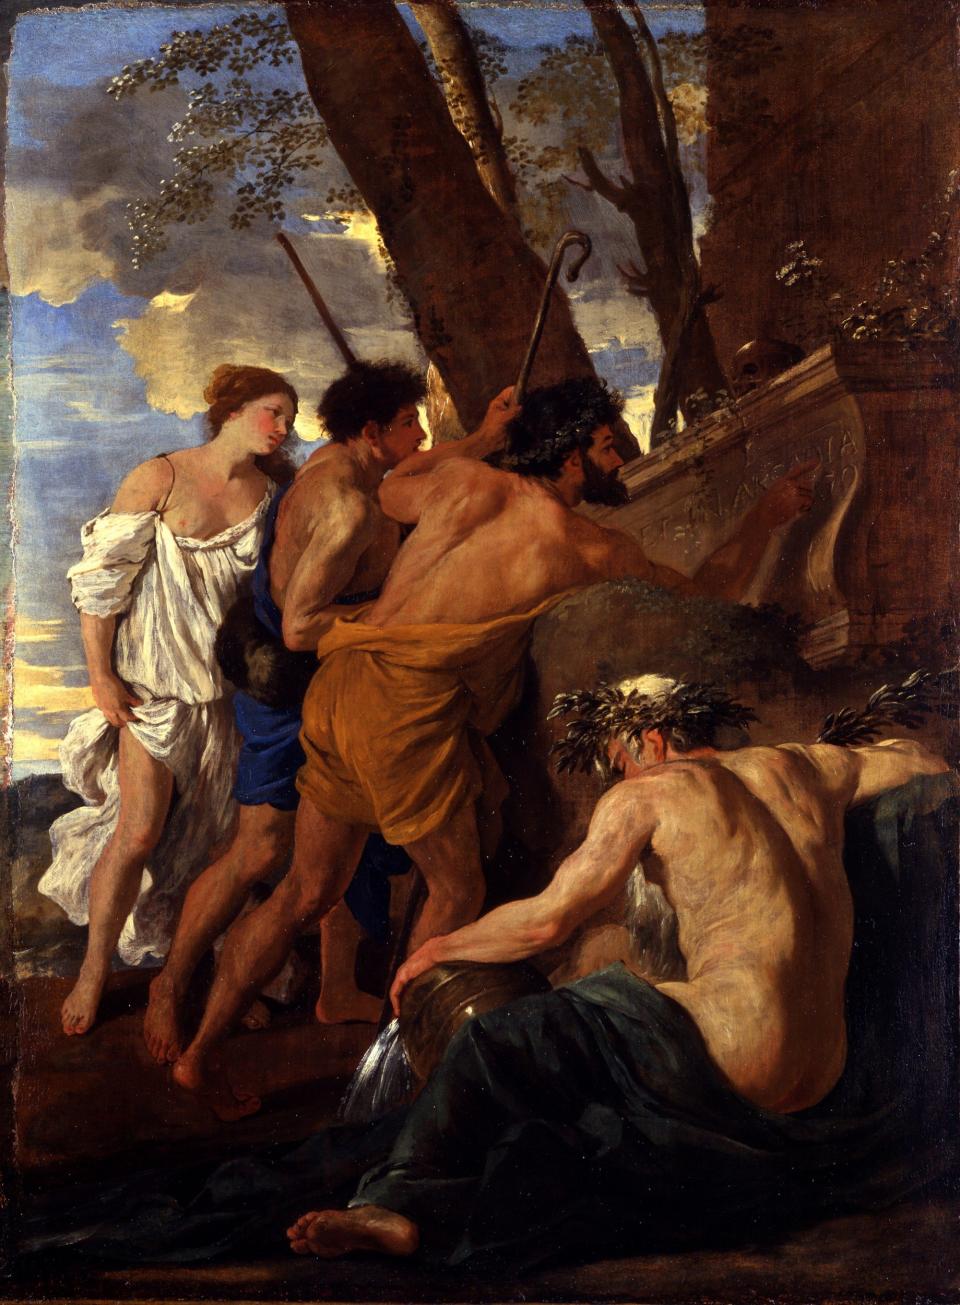 Nicolas Poussin's The Arcadian Shepherds, c. 1627 - 1629 - The Devonshire Collections, Chatsworth